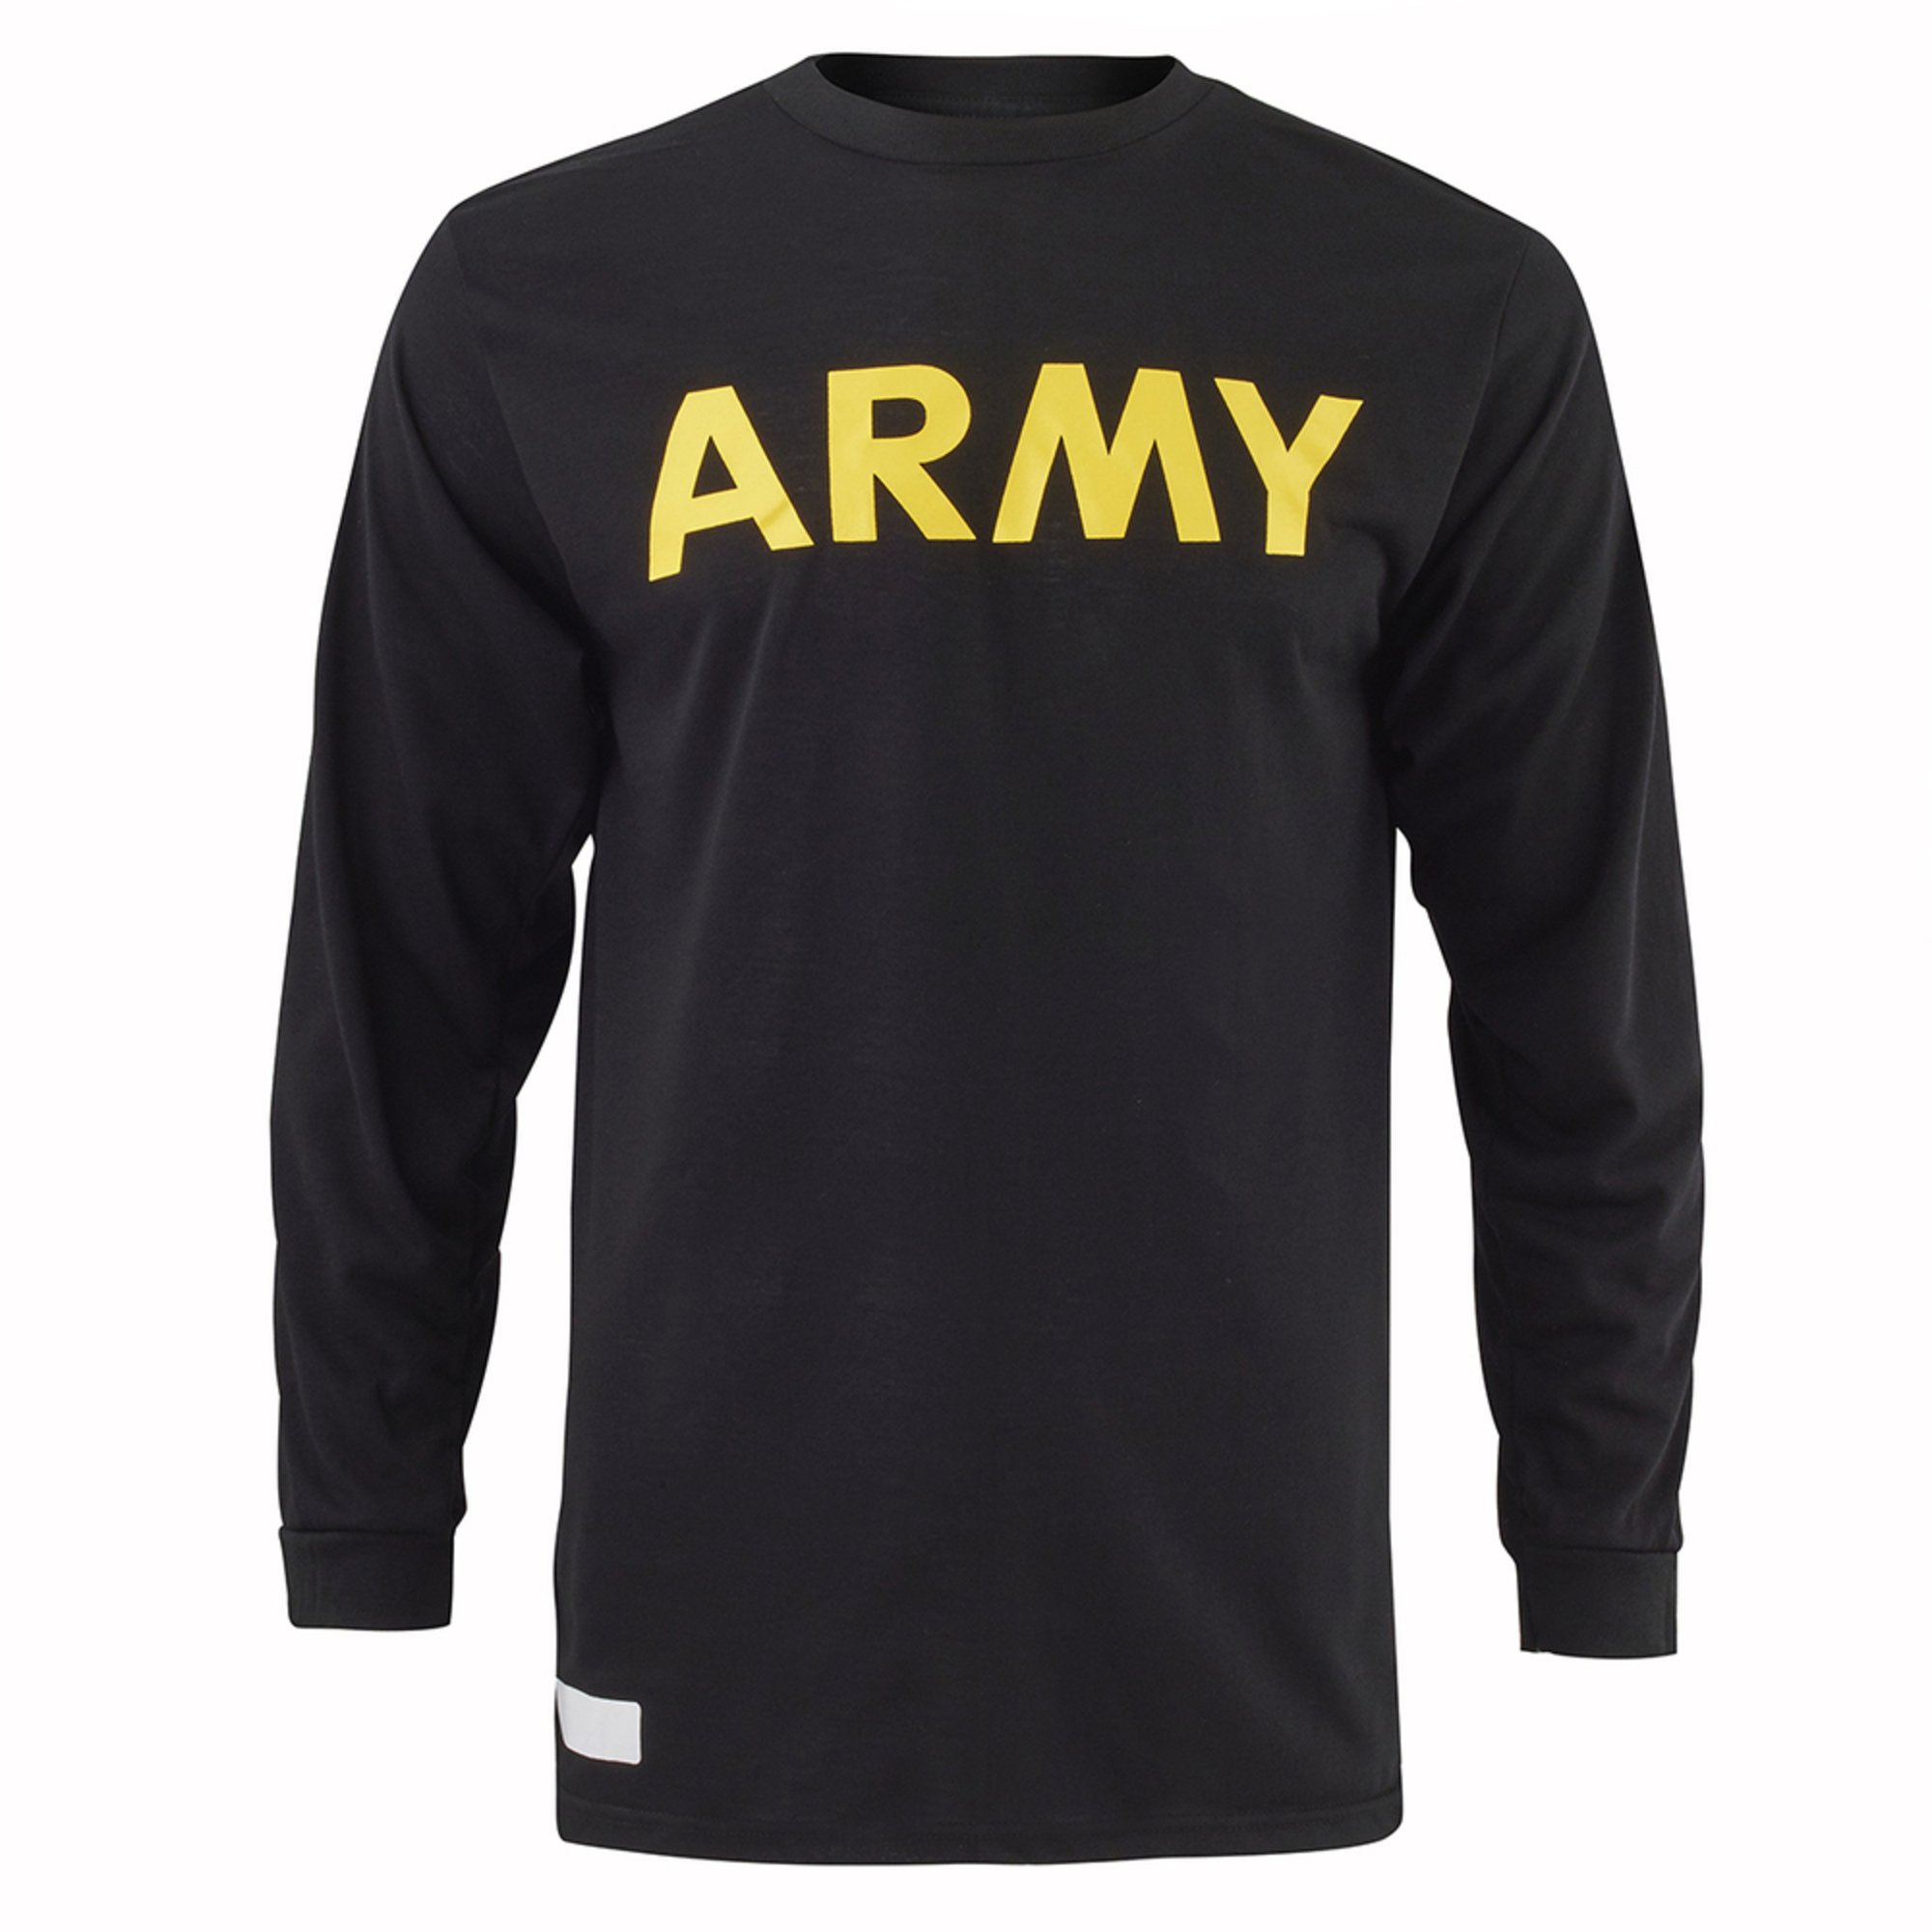 Army Long Sleeve Physical Training Shirt | Army | Military - Shop Your ...